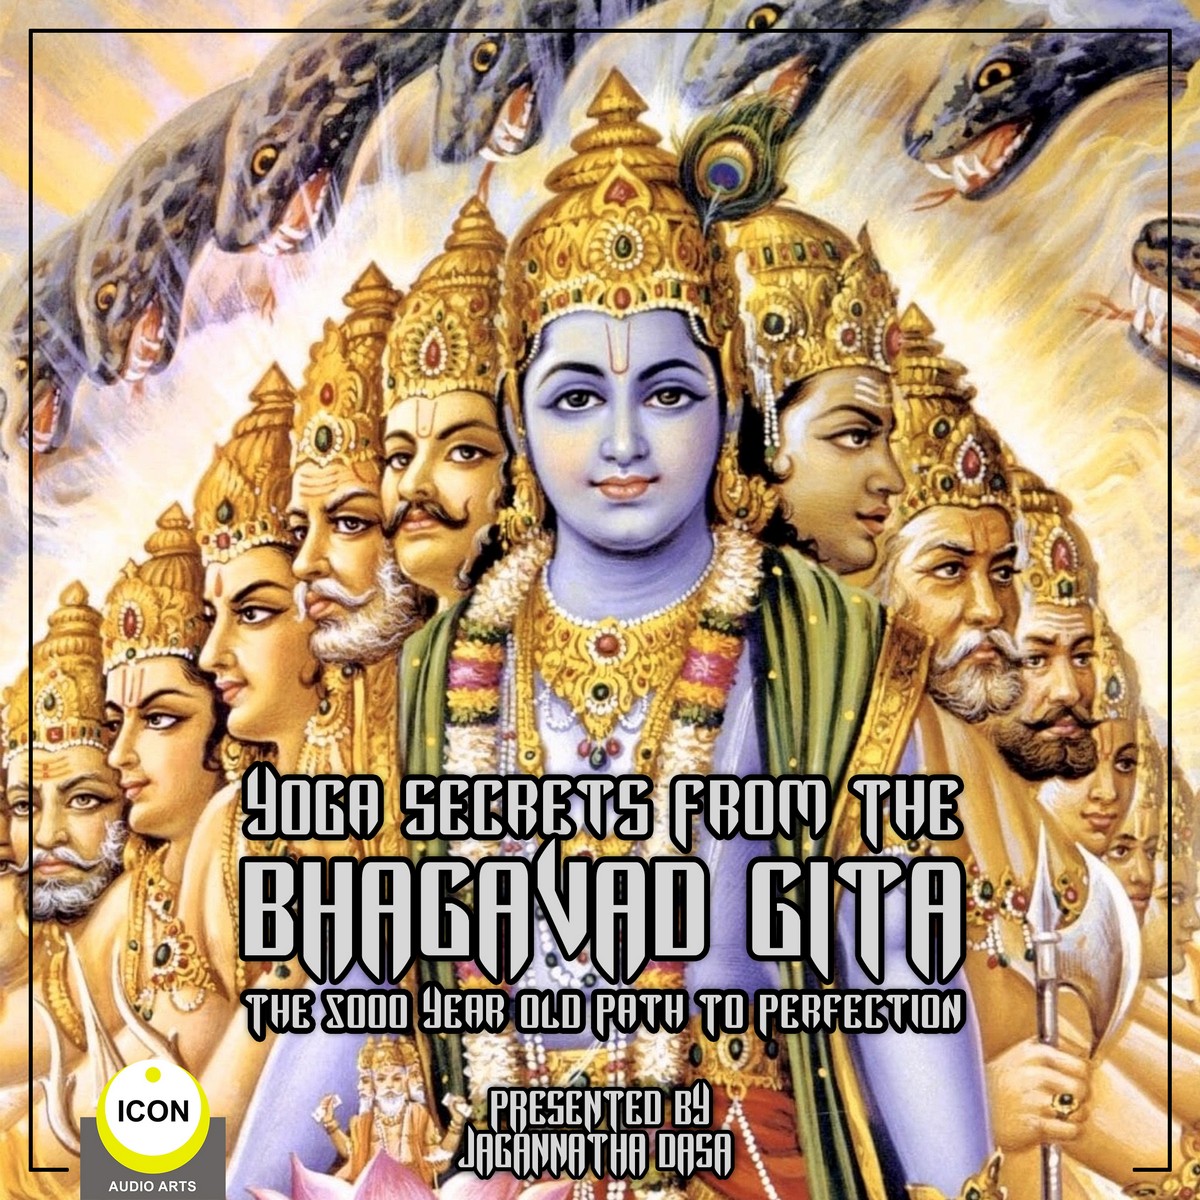 Yoga Secrets From The Bhagavad Gita – The 5000 Year Old Path To Perfection